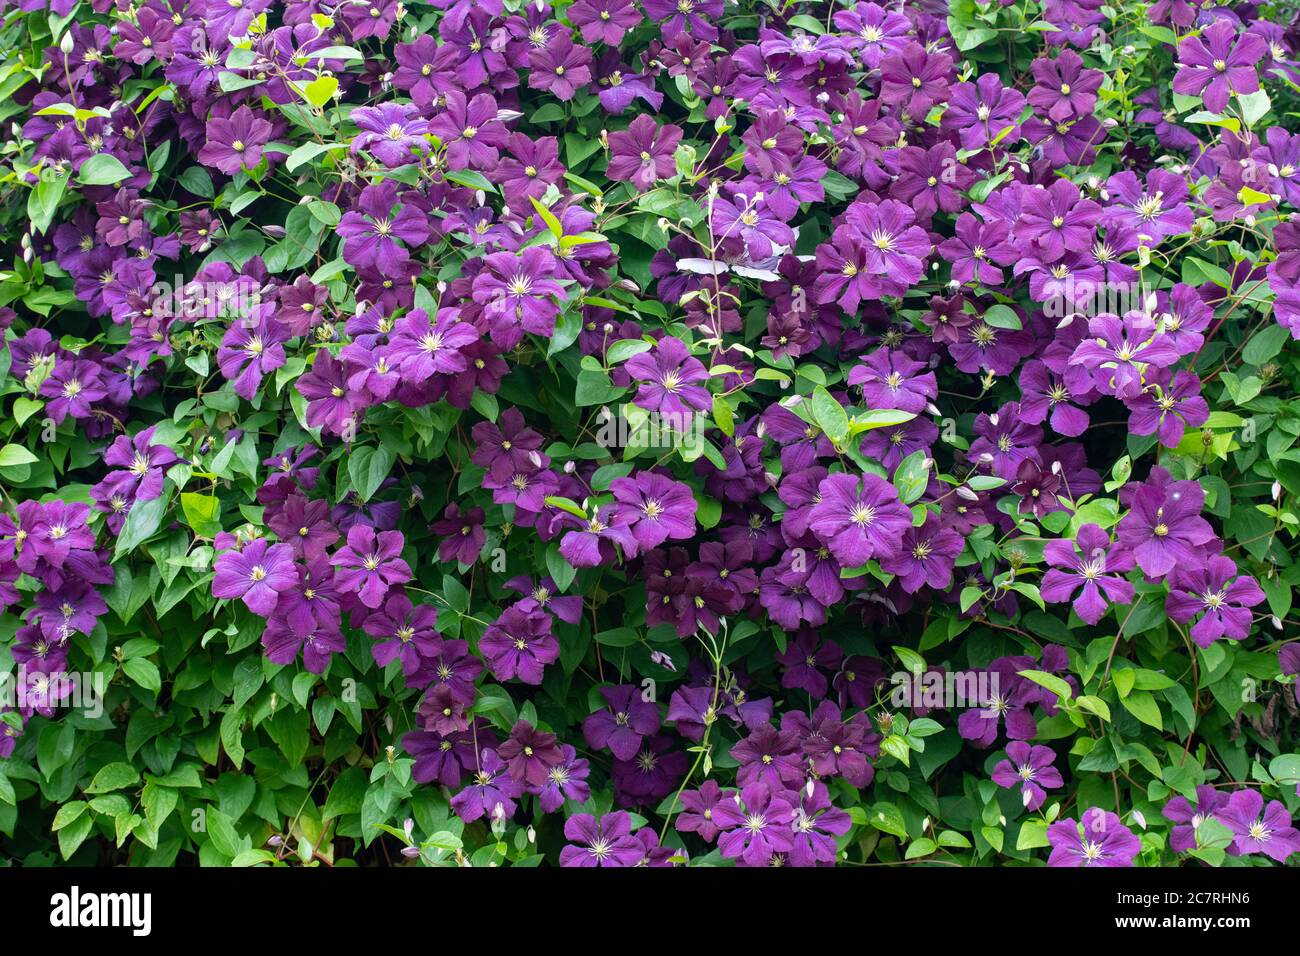 Clematis Etoile violette, a viticella group 3 clematis in UK garden in summer Stock Photo